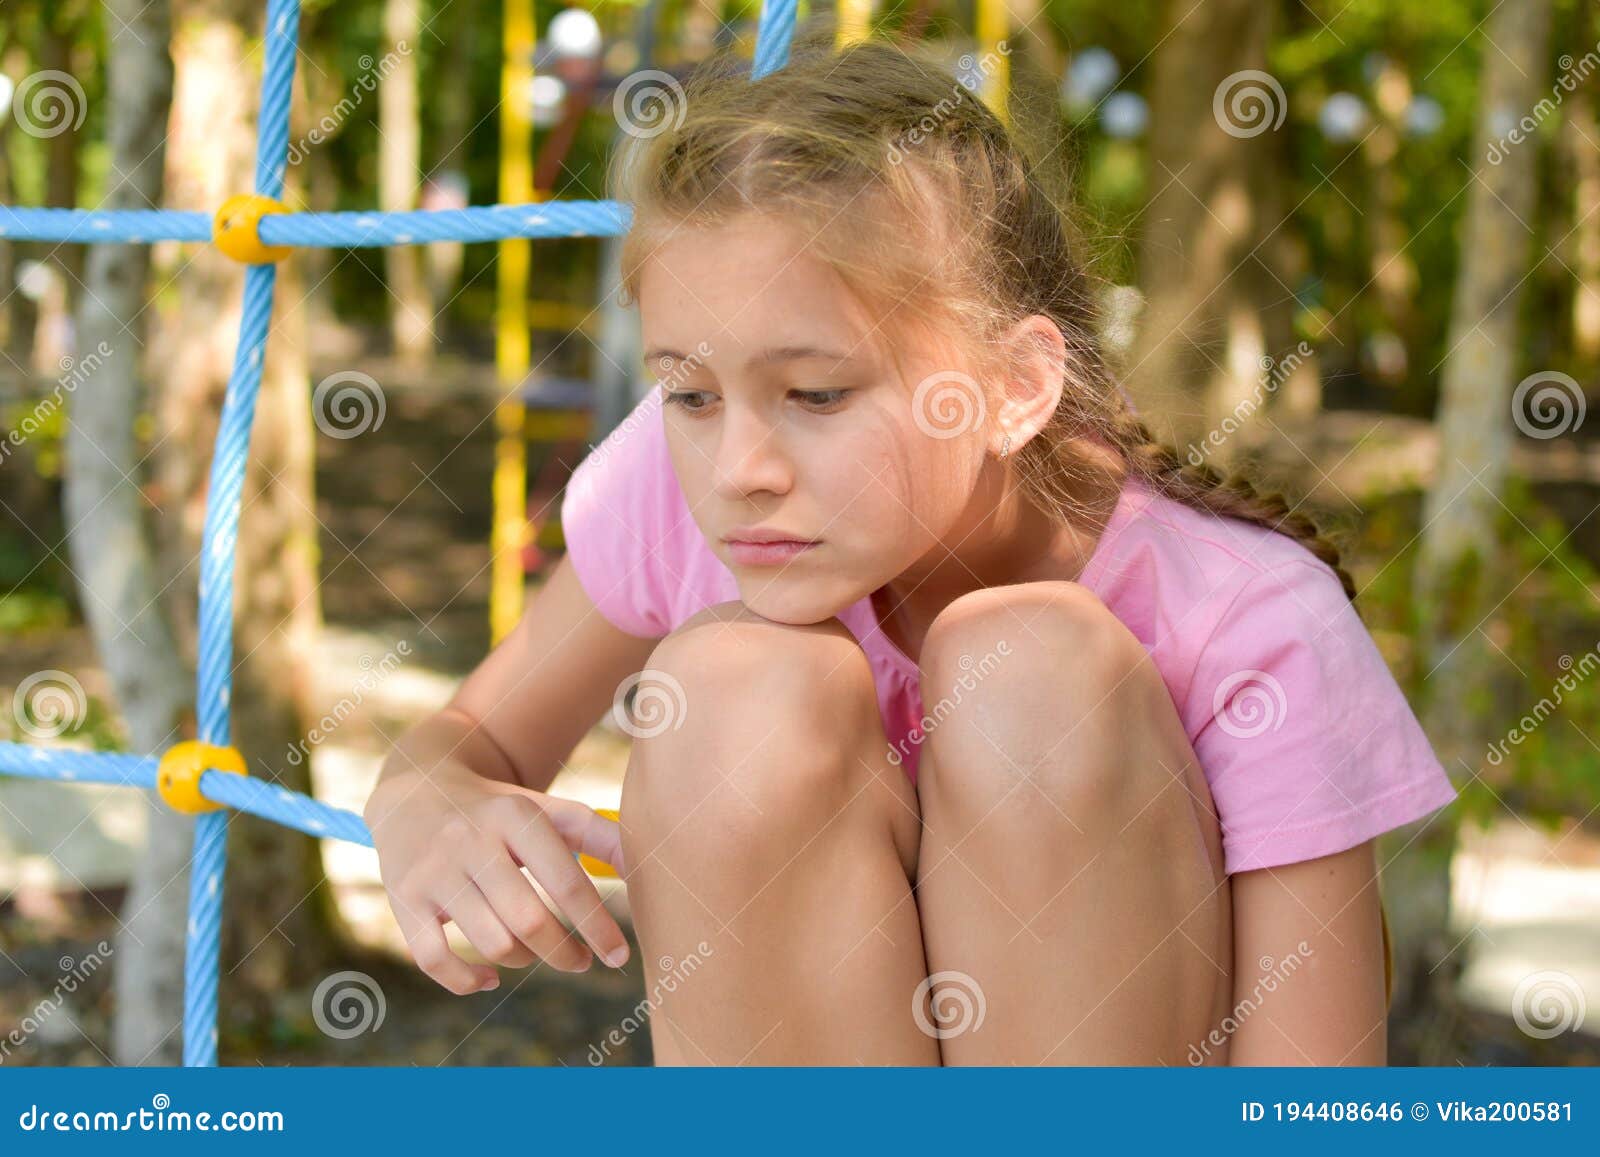 Sad Girl at the Playground. the Sad Child Became Thoughtful ...